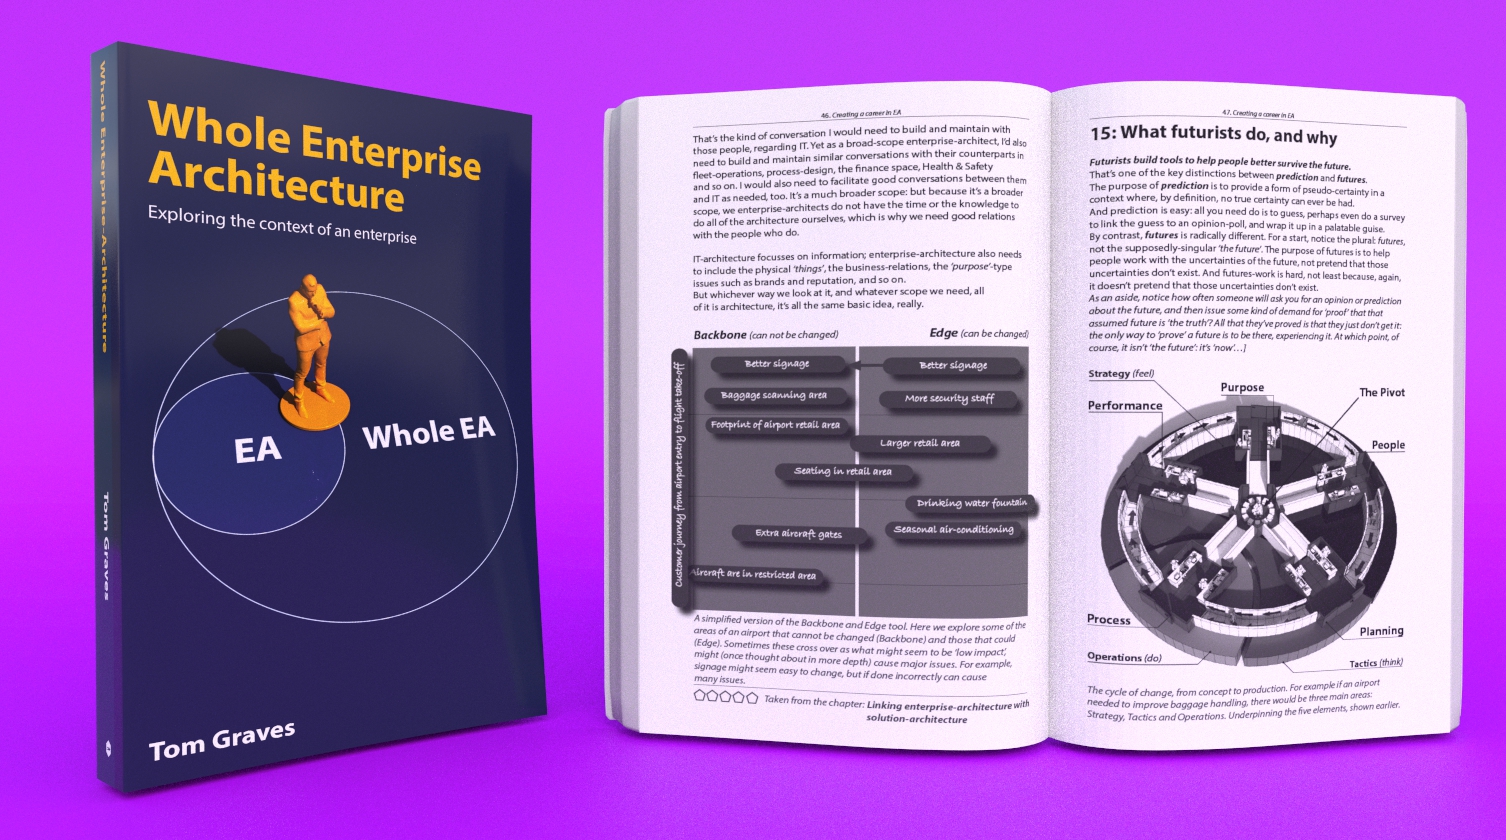 Image of the Whole EA book written by Tom Graves